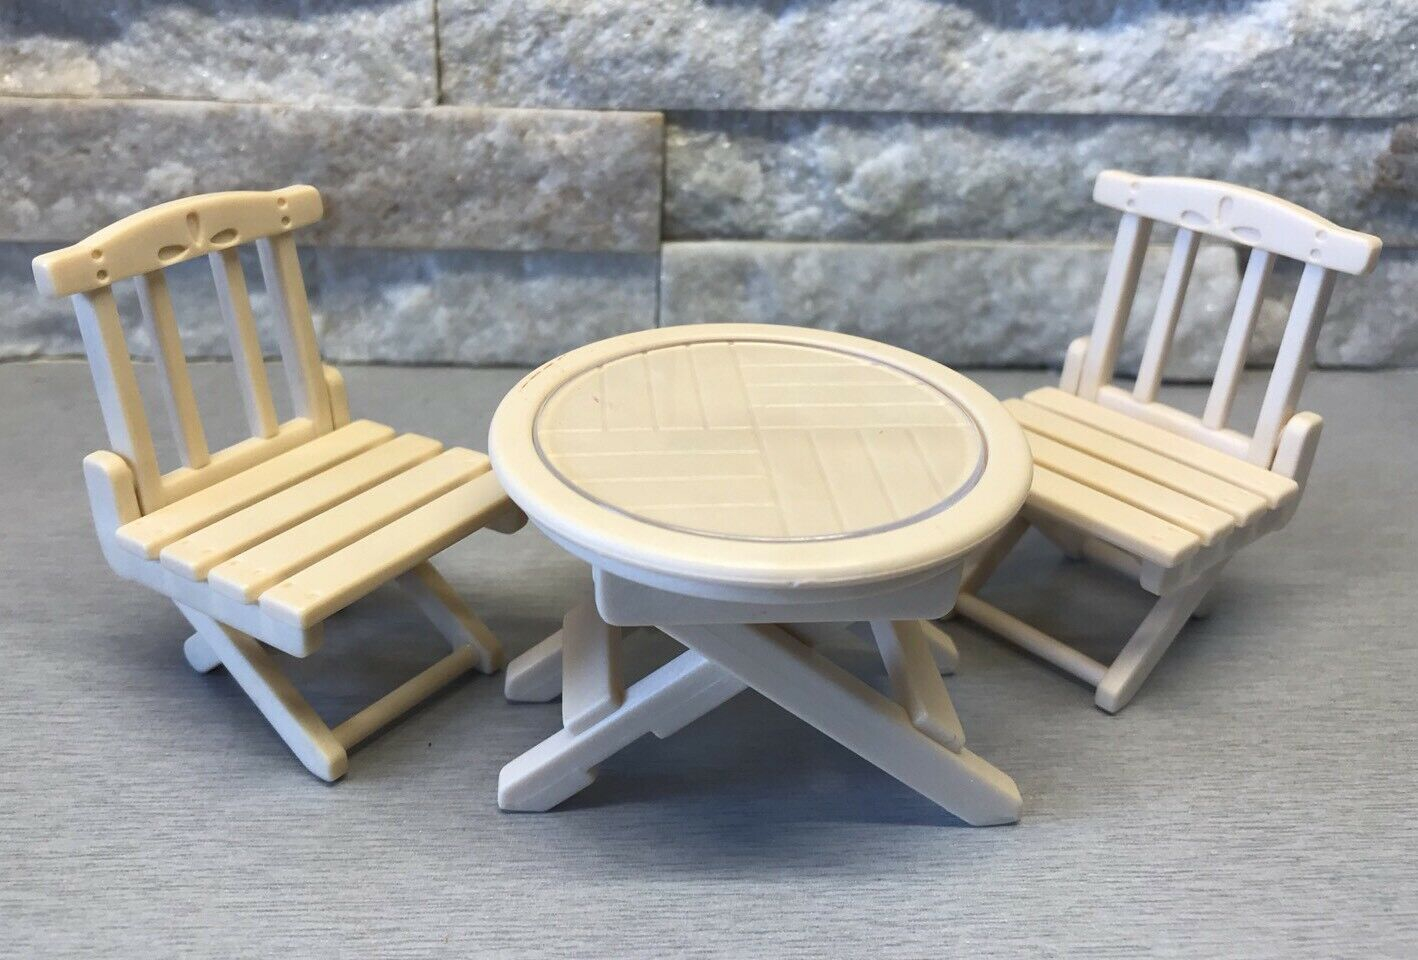 Sylvanian Families Patio Furniture Set Rare Garden Terrace Table Chairs Foldable within dimensions 1418 X 960